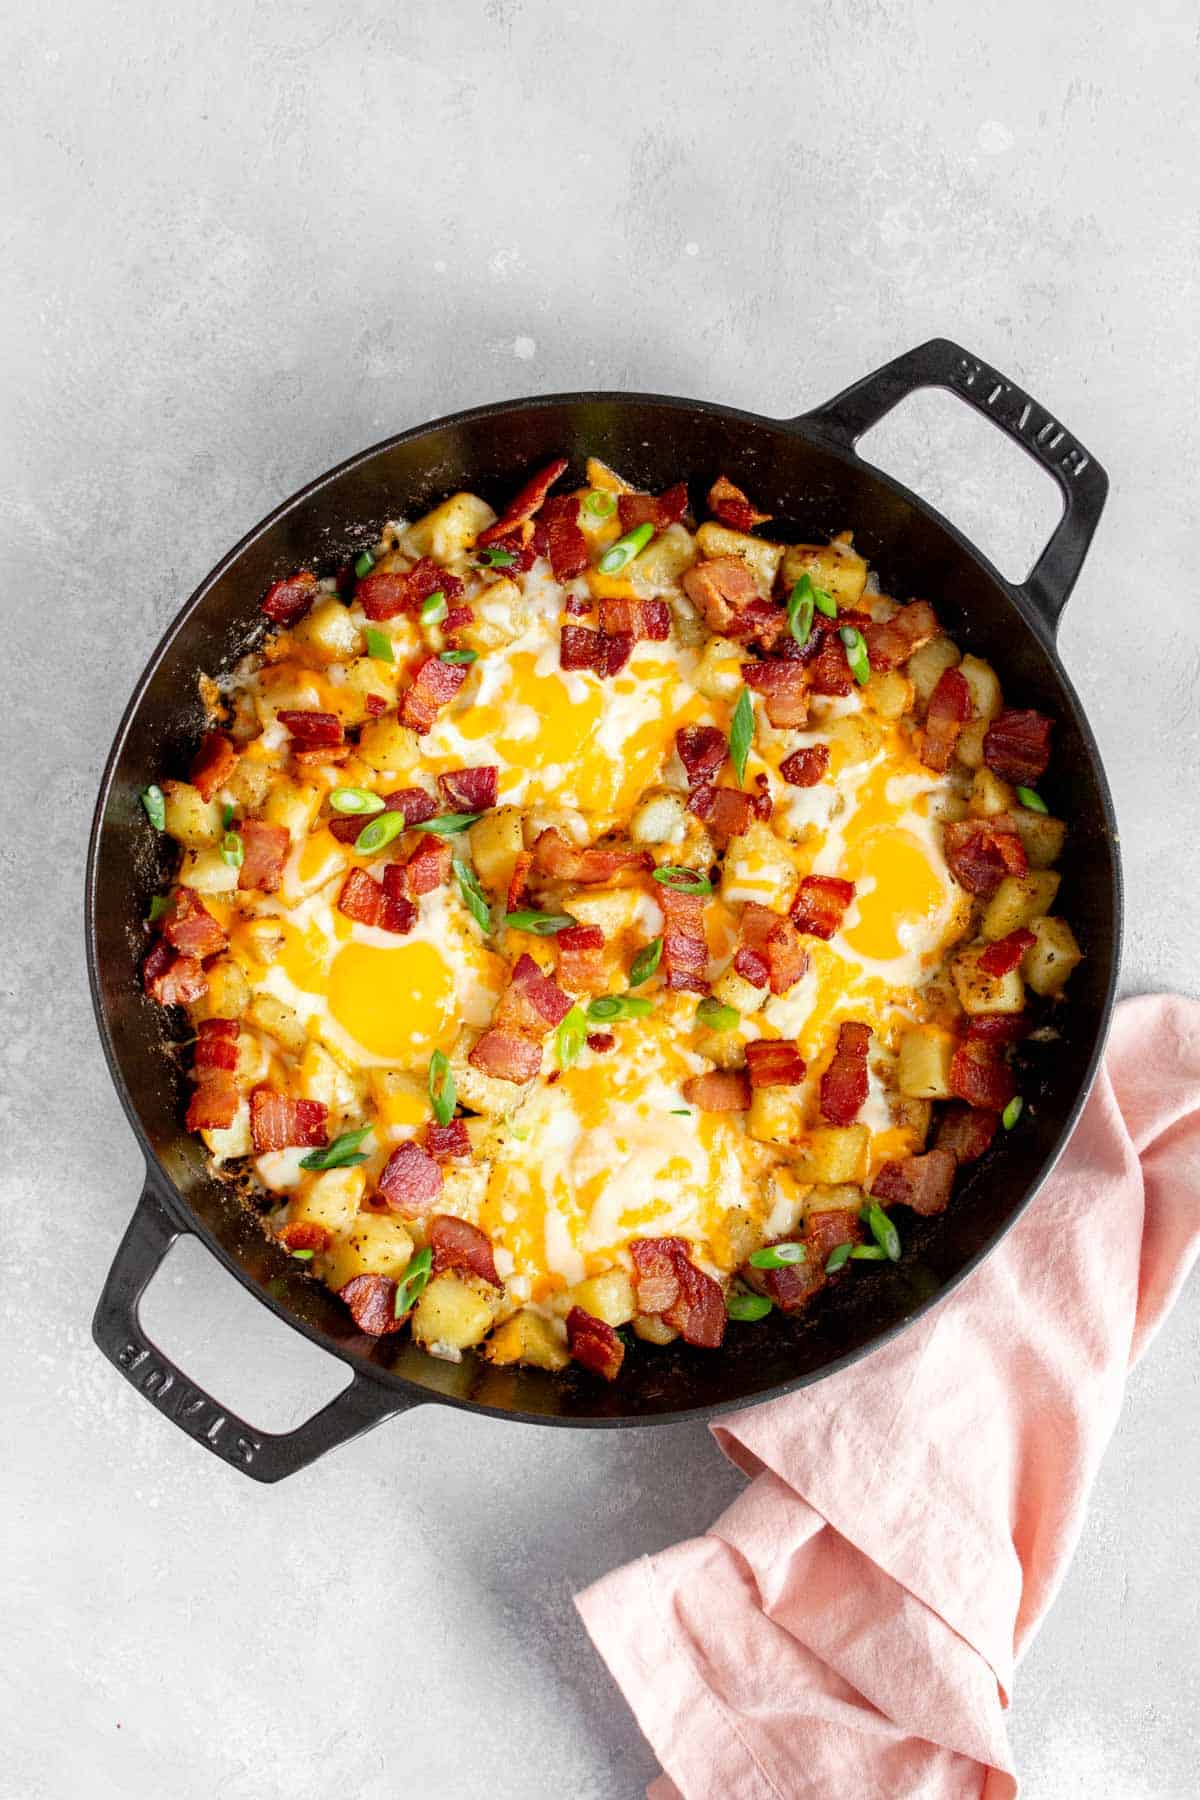 Overhead view of a skillet with diced potatoes, eggs, bacon, and green onions.